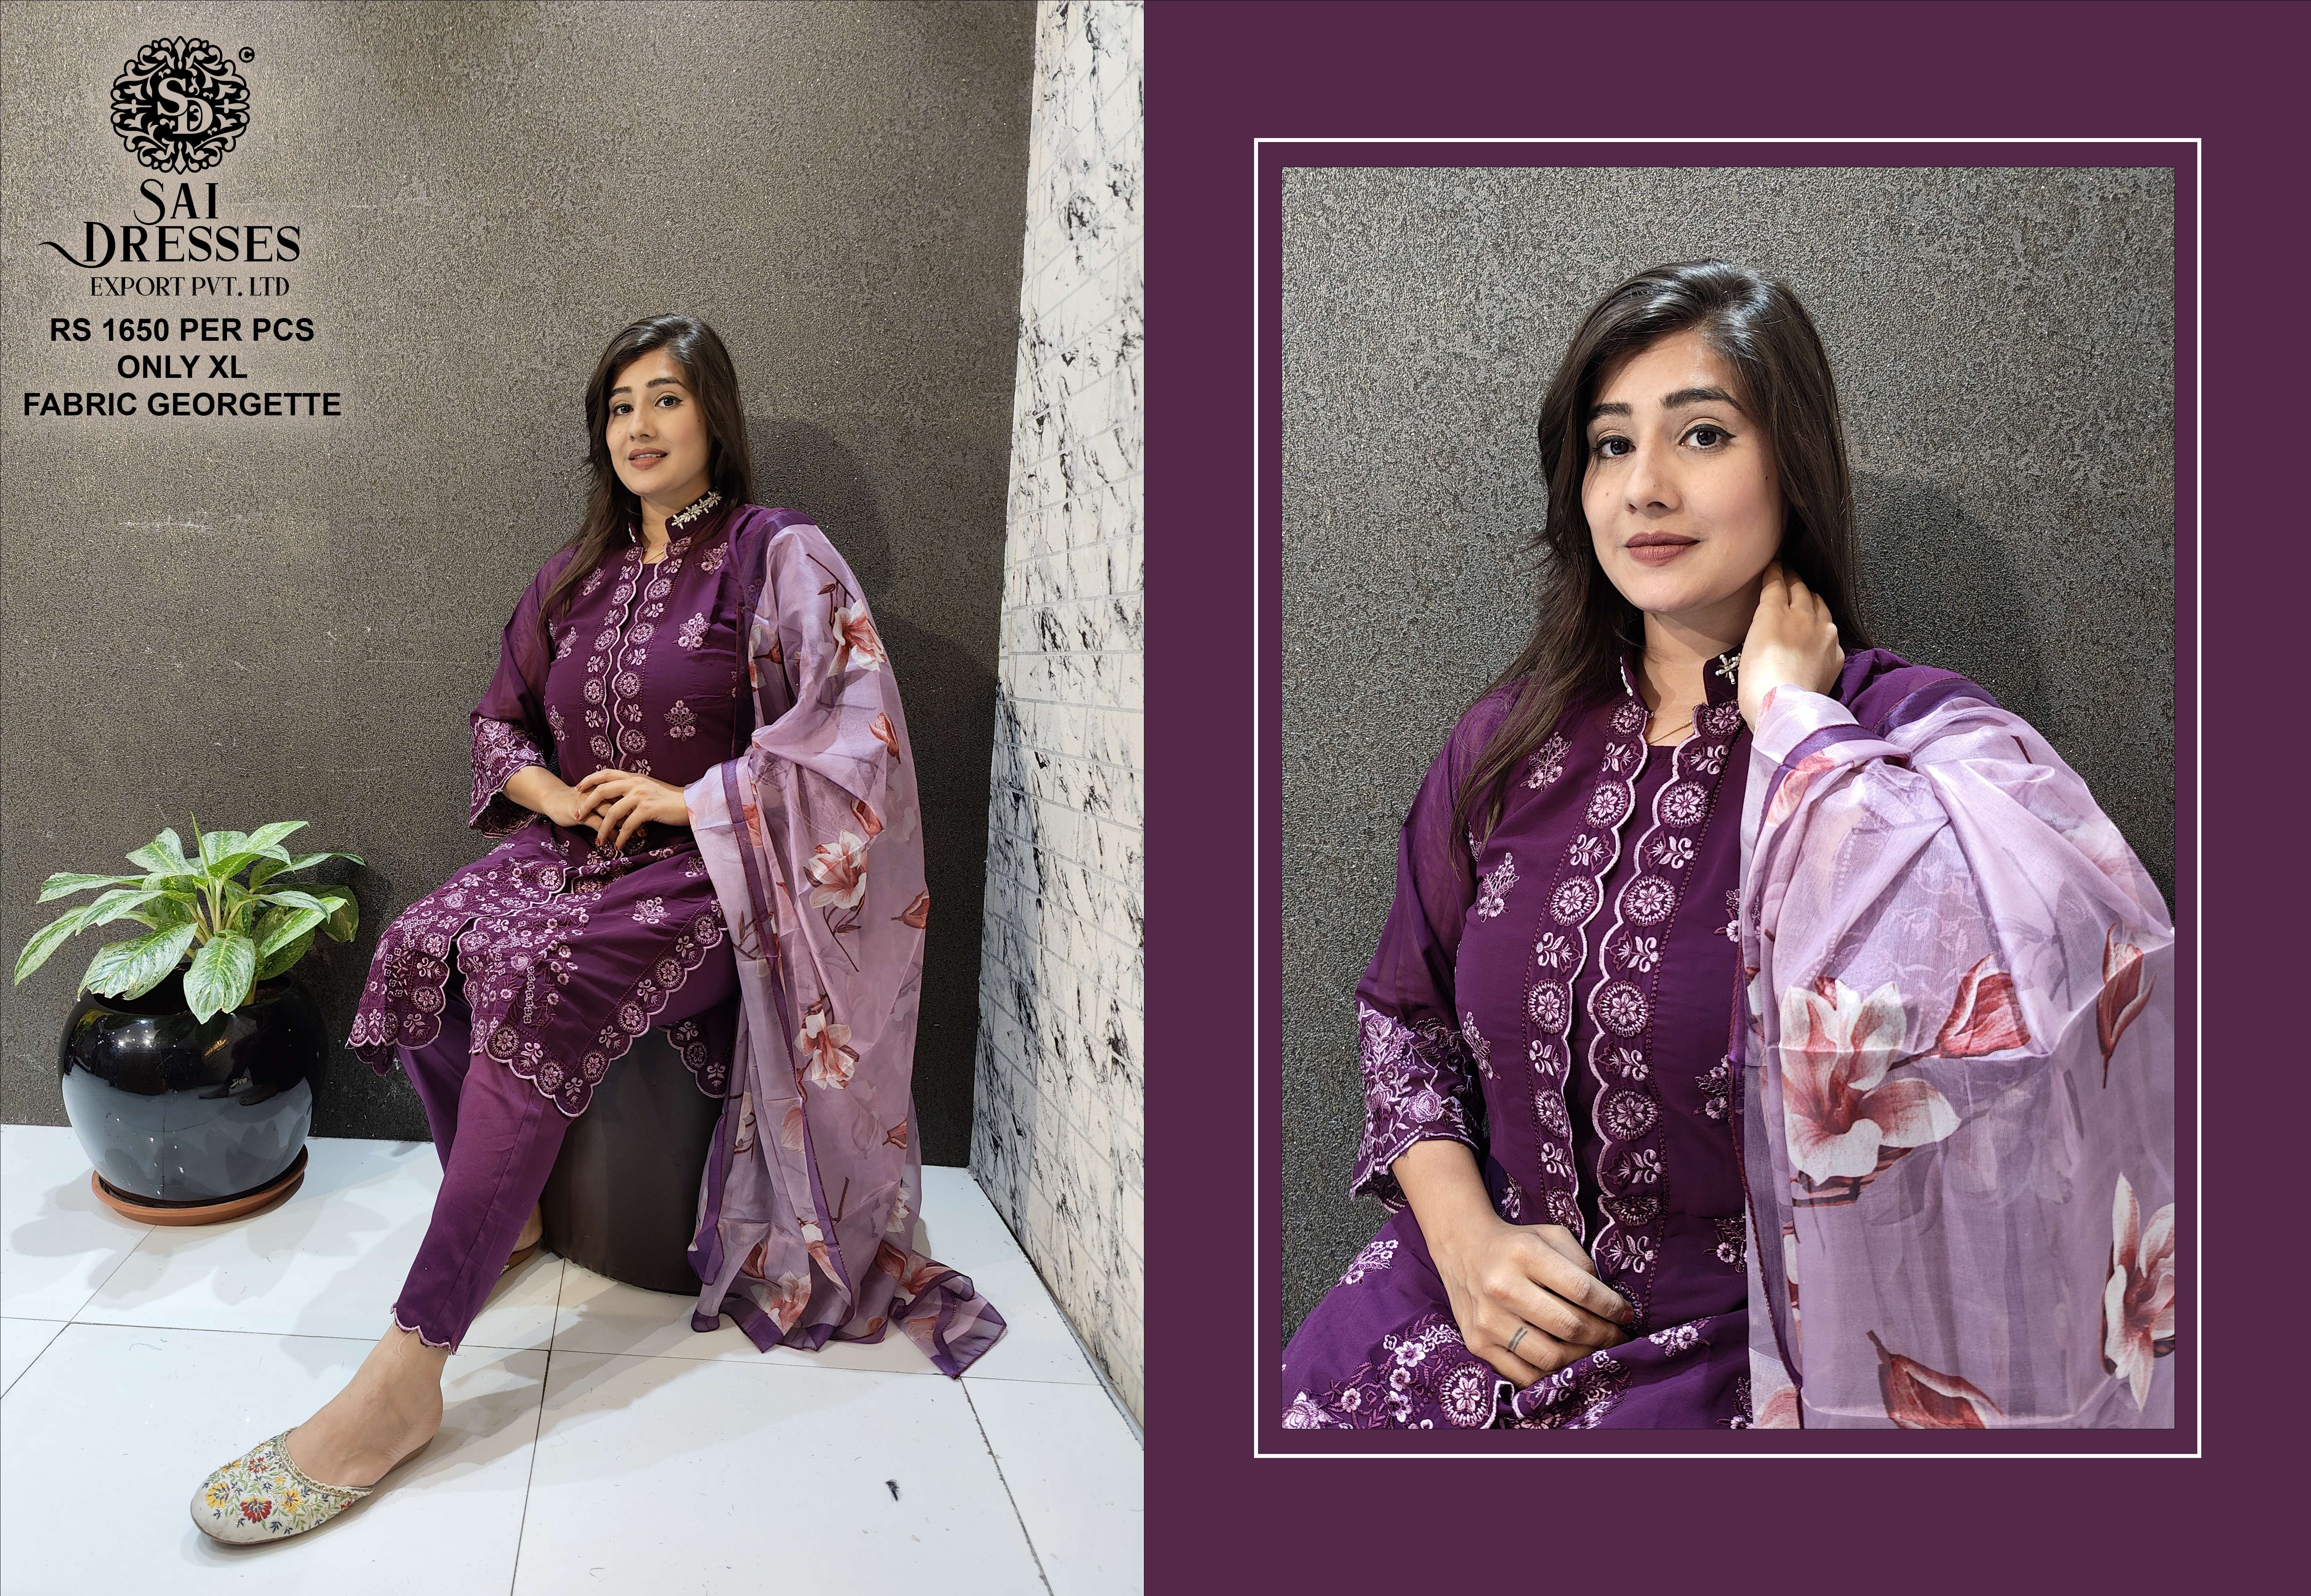 SAI DRESSES PRESENT D.NO SD1005 TO SD1008 READY TO EXCLUSIVE PARTY WEAR EMBROIDERED DESIGNER PAKISTANI 3 PIECE CONCEPT COMBO COLLECTION IN WHOLESALE RATE IN SURAT